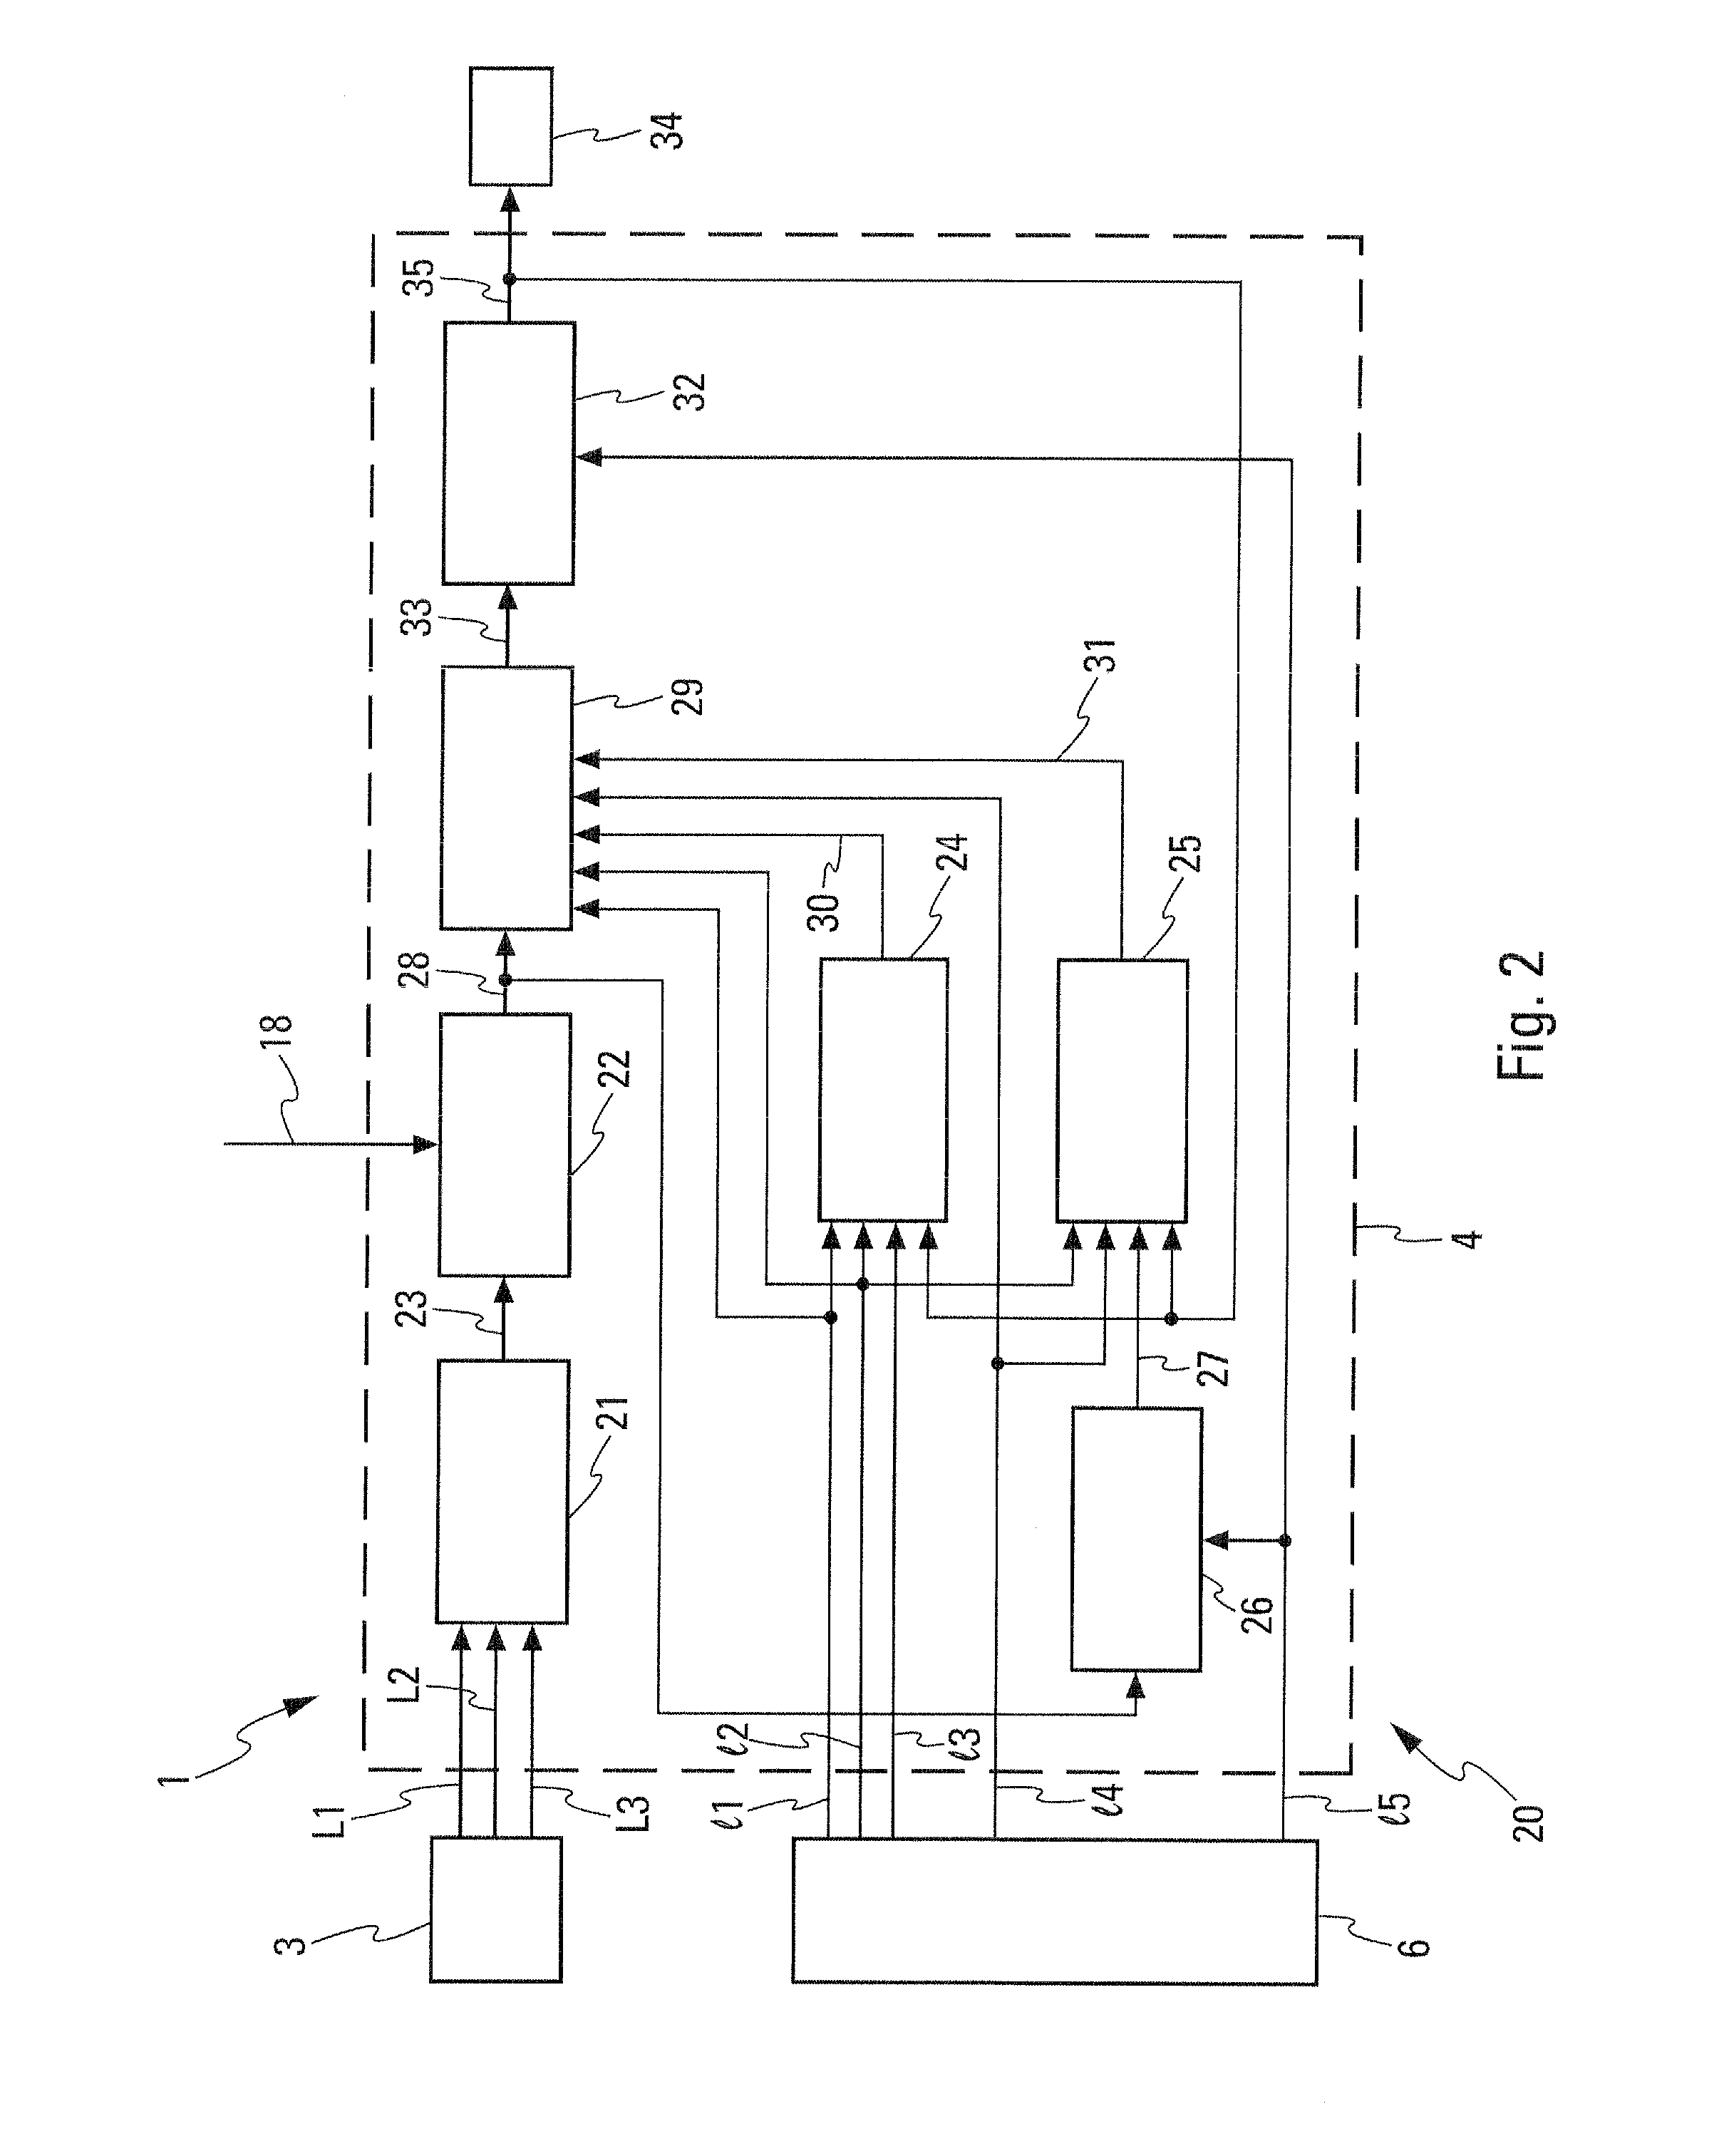 Method and device for detecting an erroneous speed generated by an air data inertial reference system